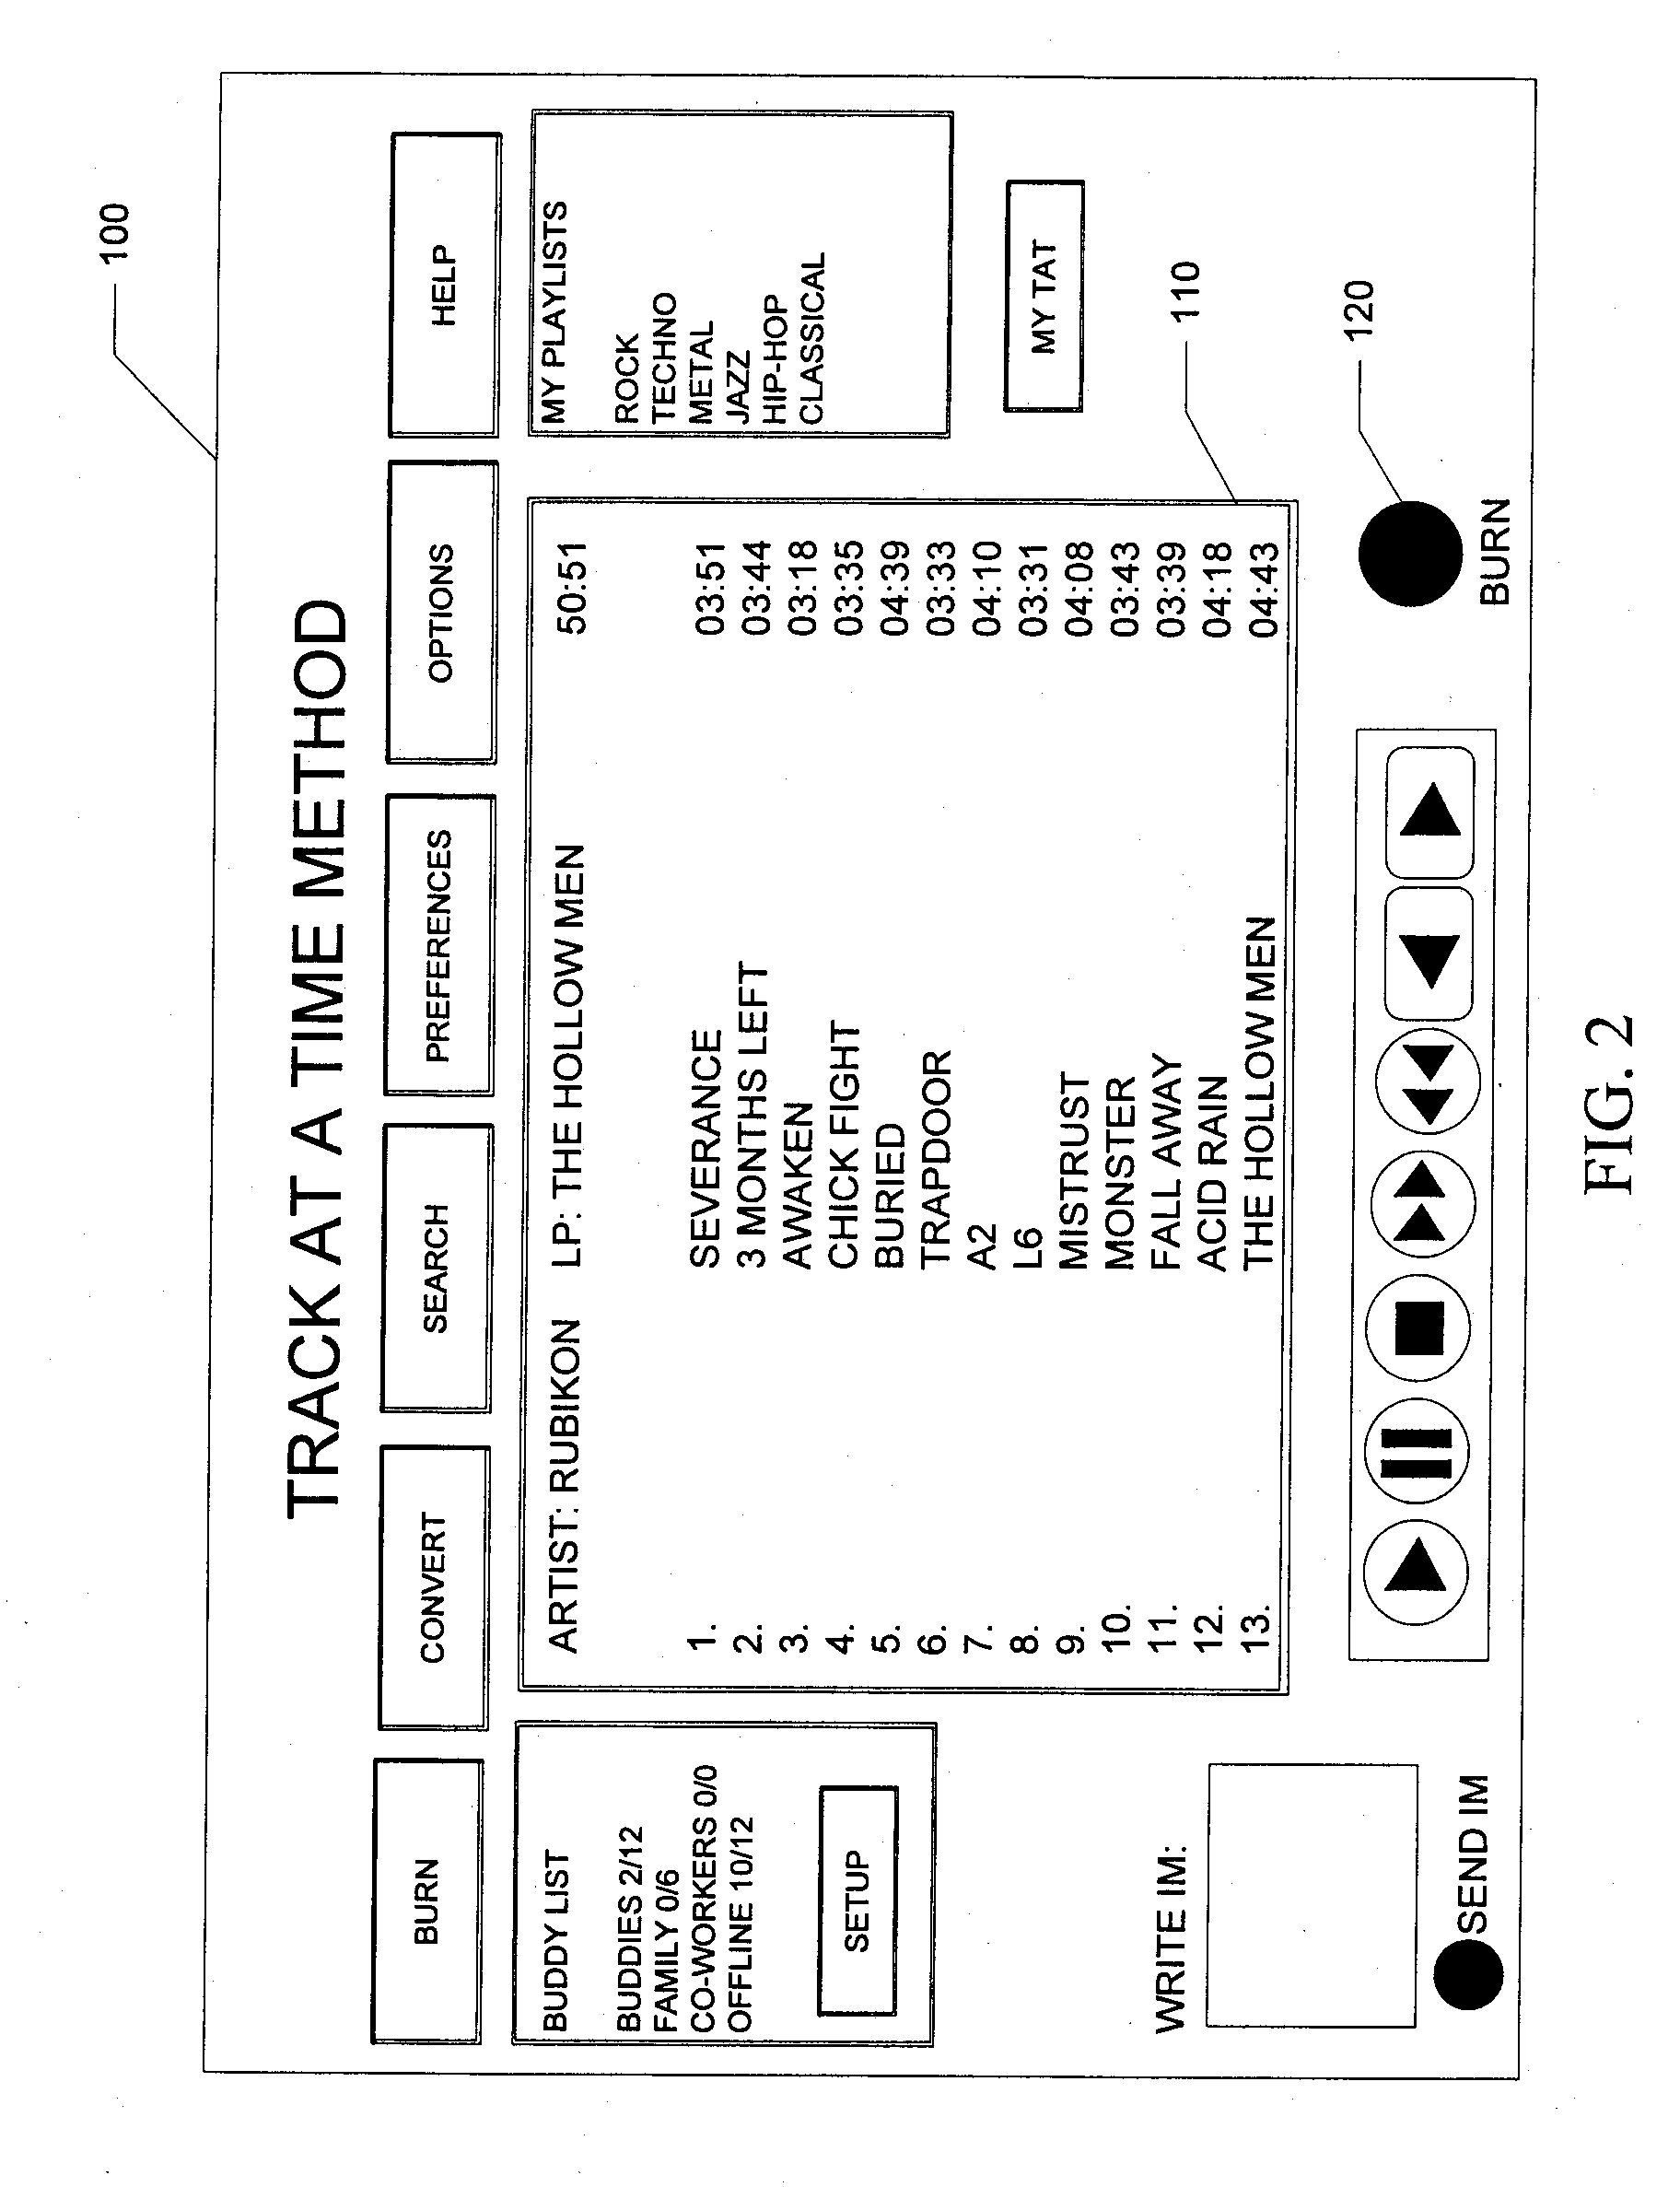 System and Method for Concurrently Downloading Digital Content and Recording to Removable Media